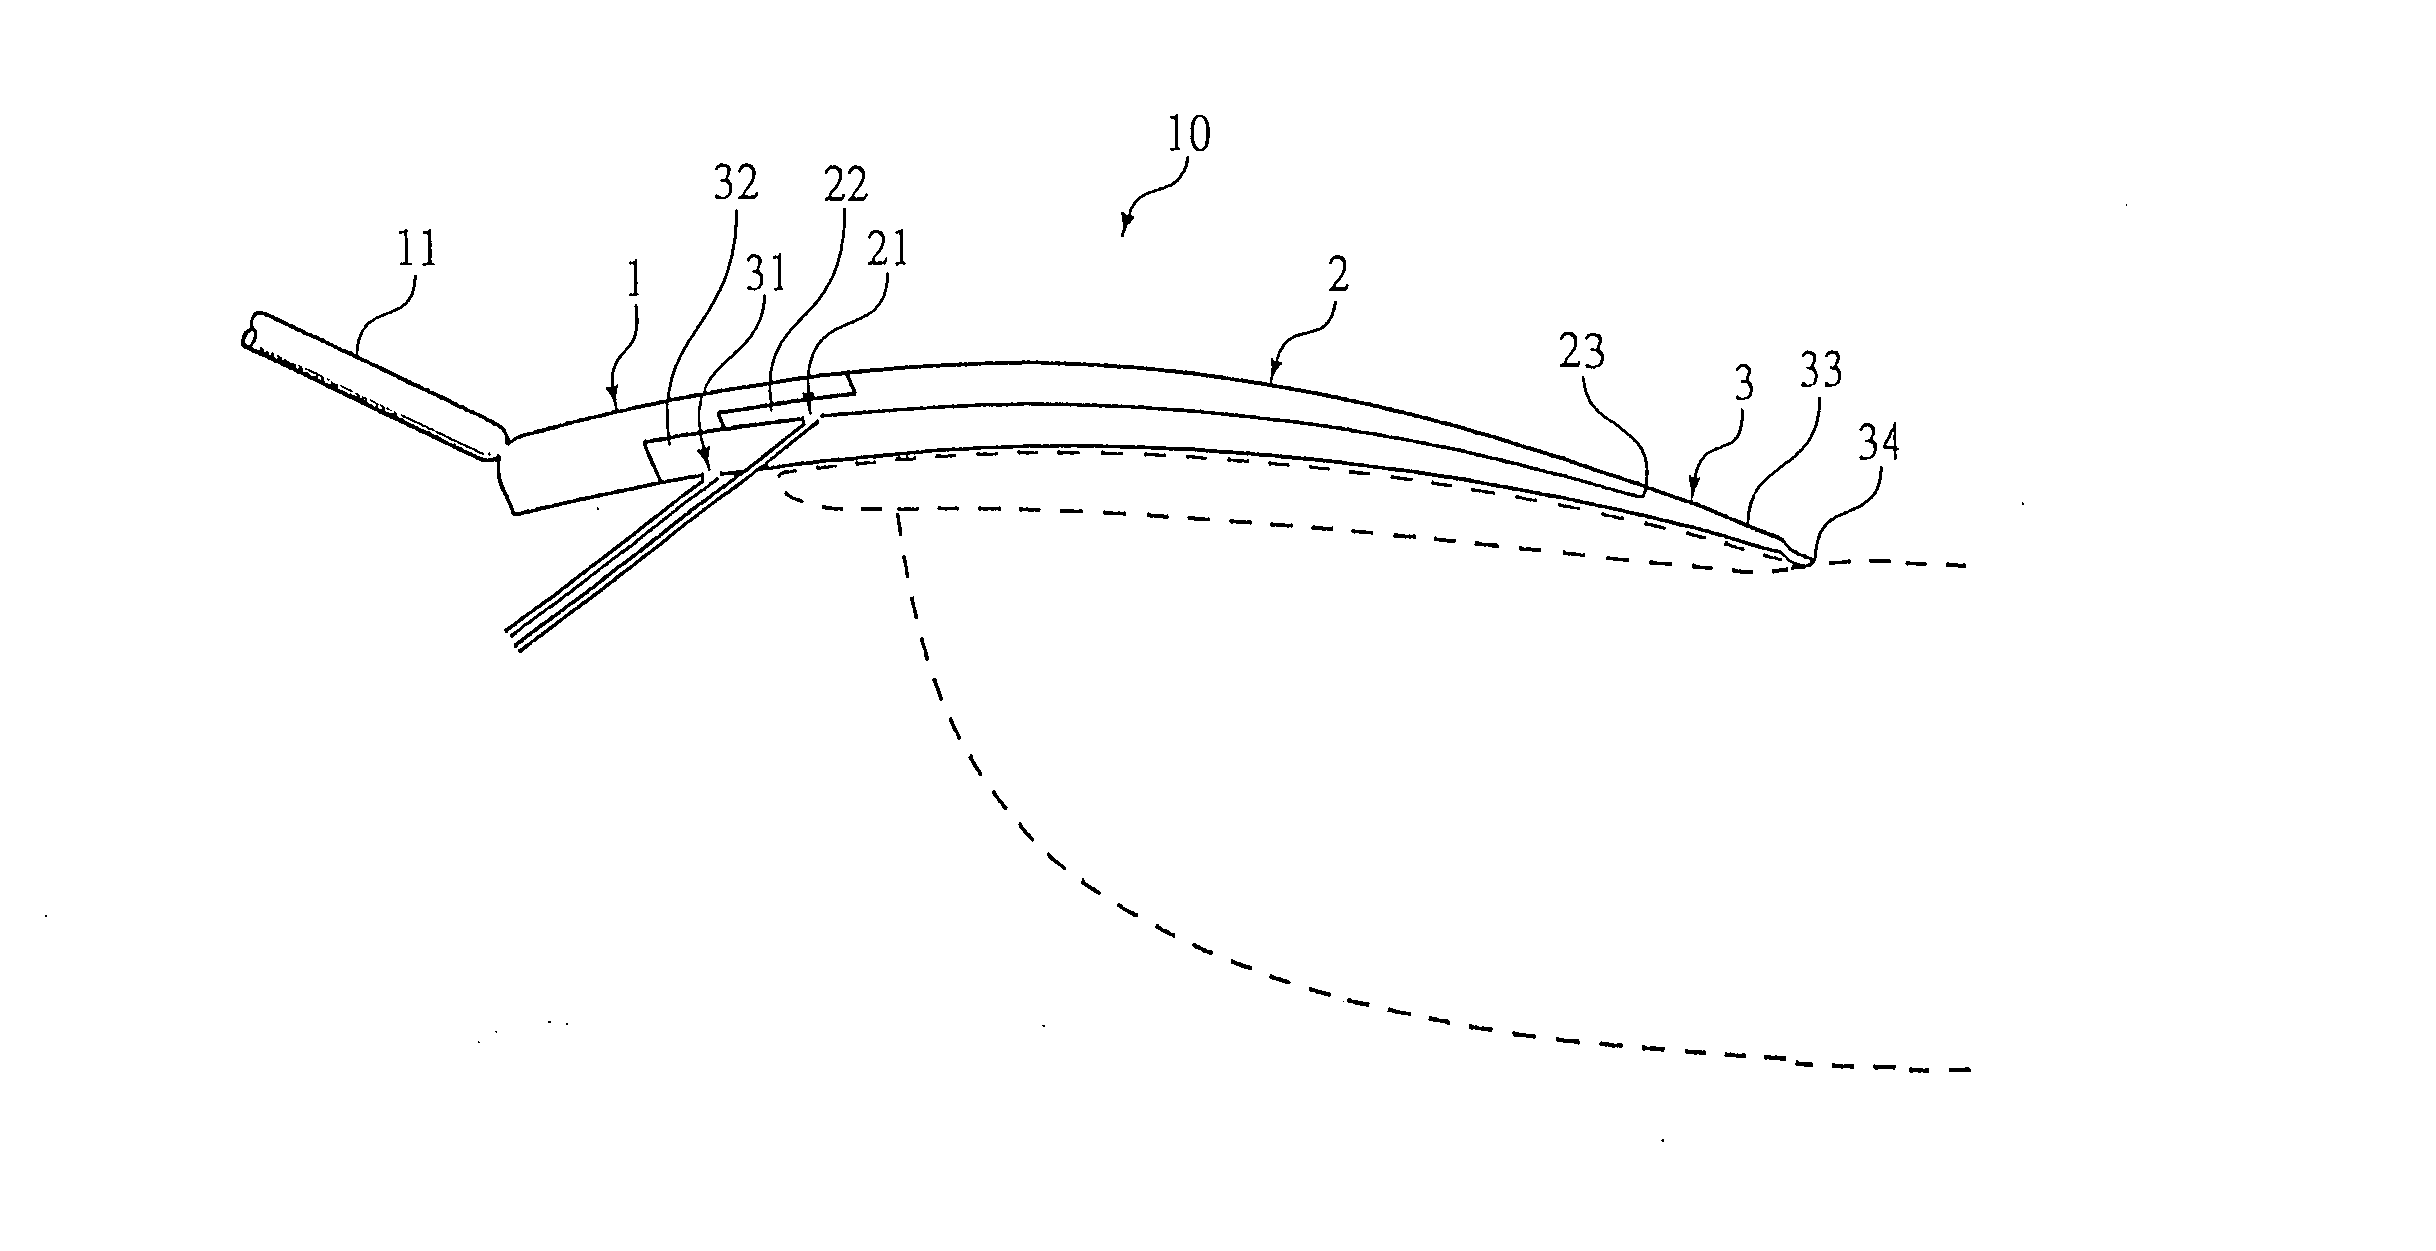 Artificial nail and method of forming same